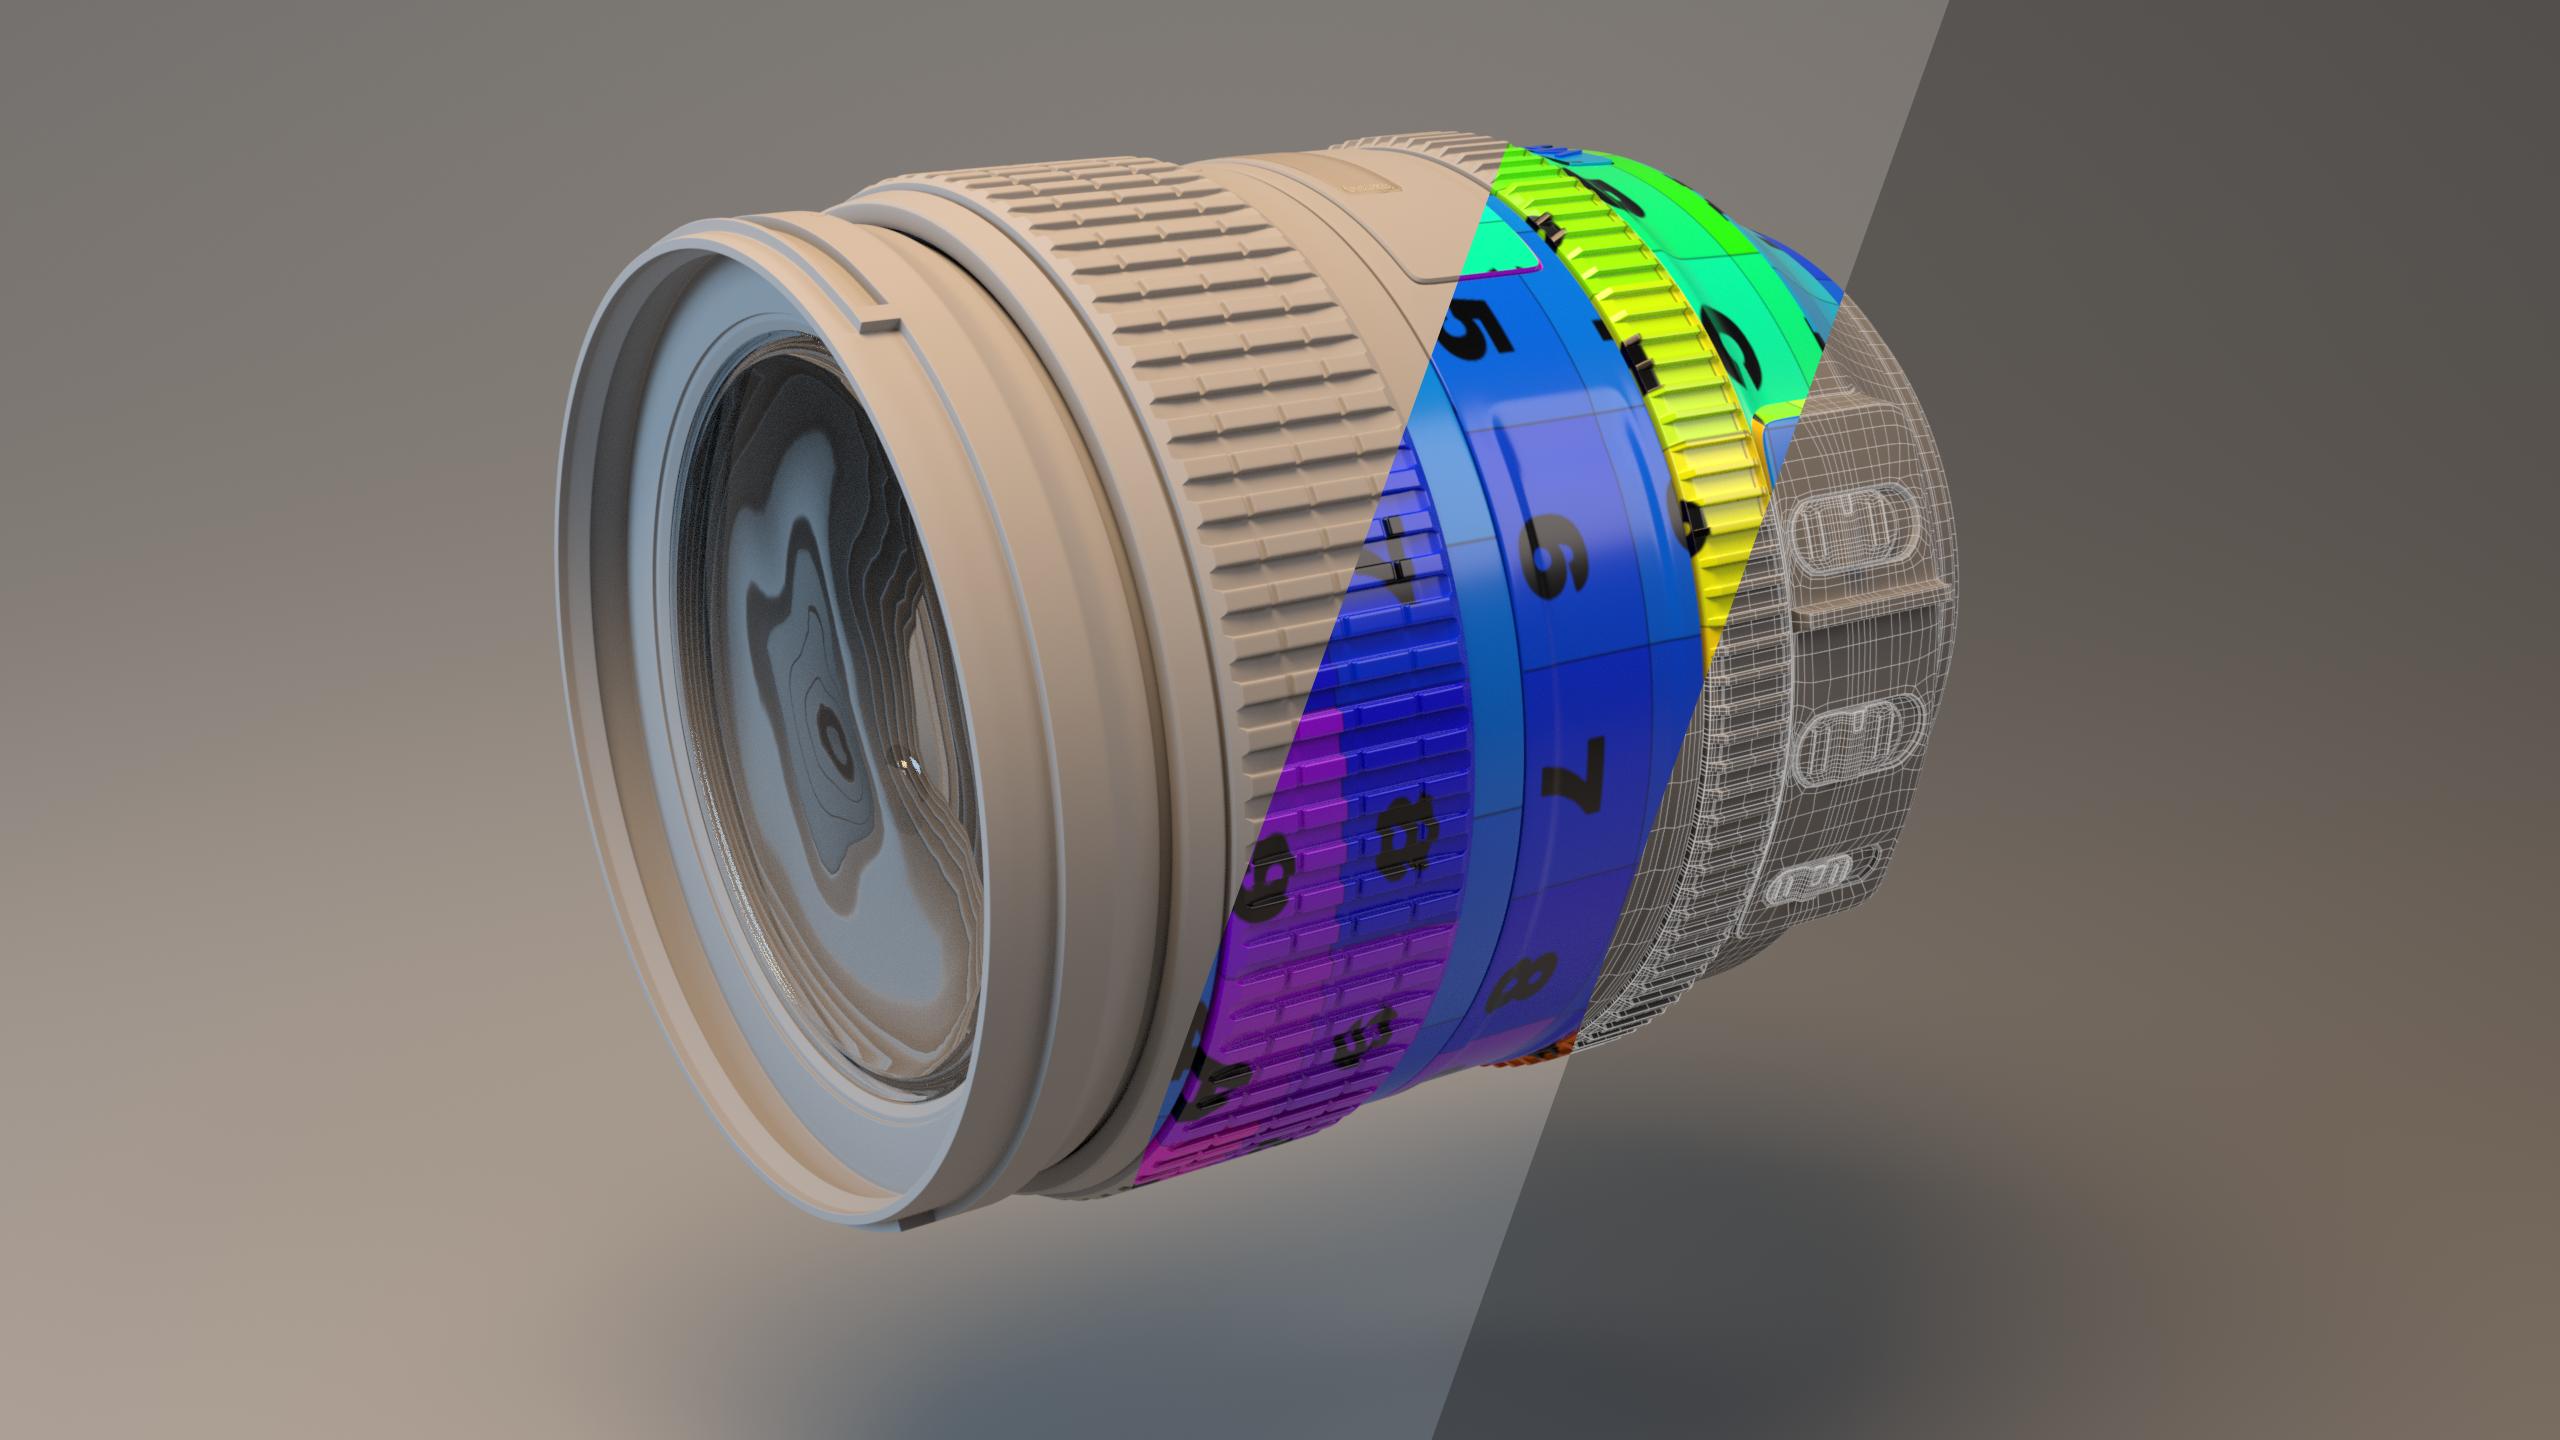 BA VFX work by Henry Cordingley showing a 3D model of a camera lens